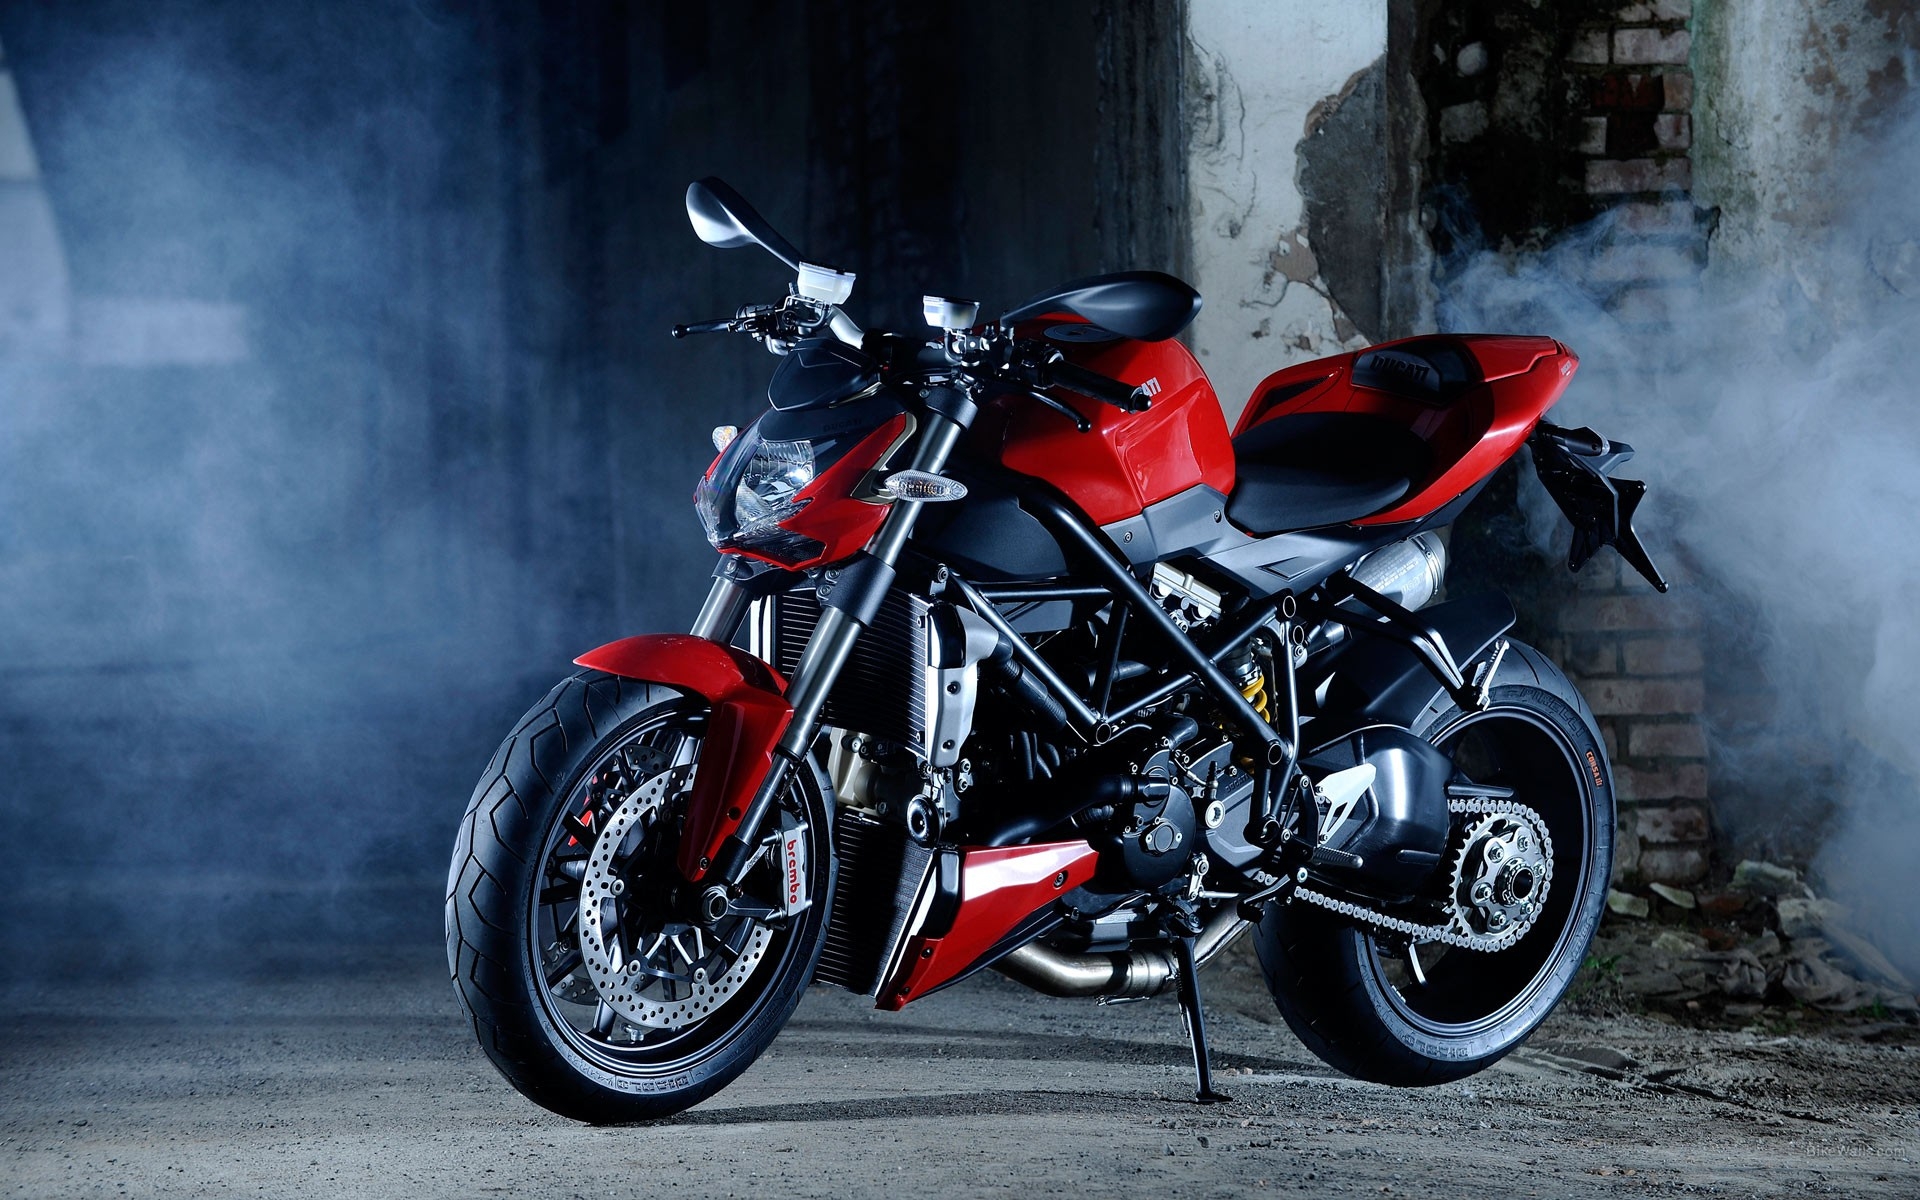 Wallpapers Dukati motorcycle red and black on the desktop